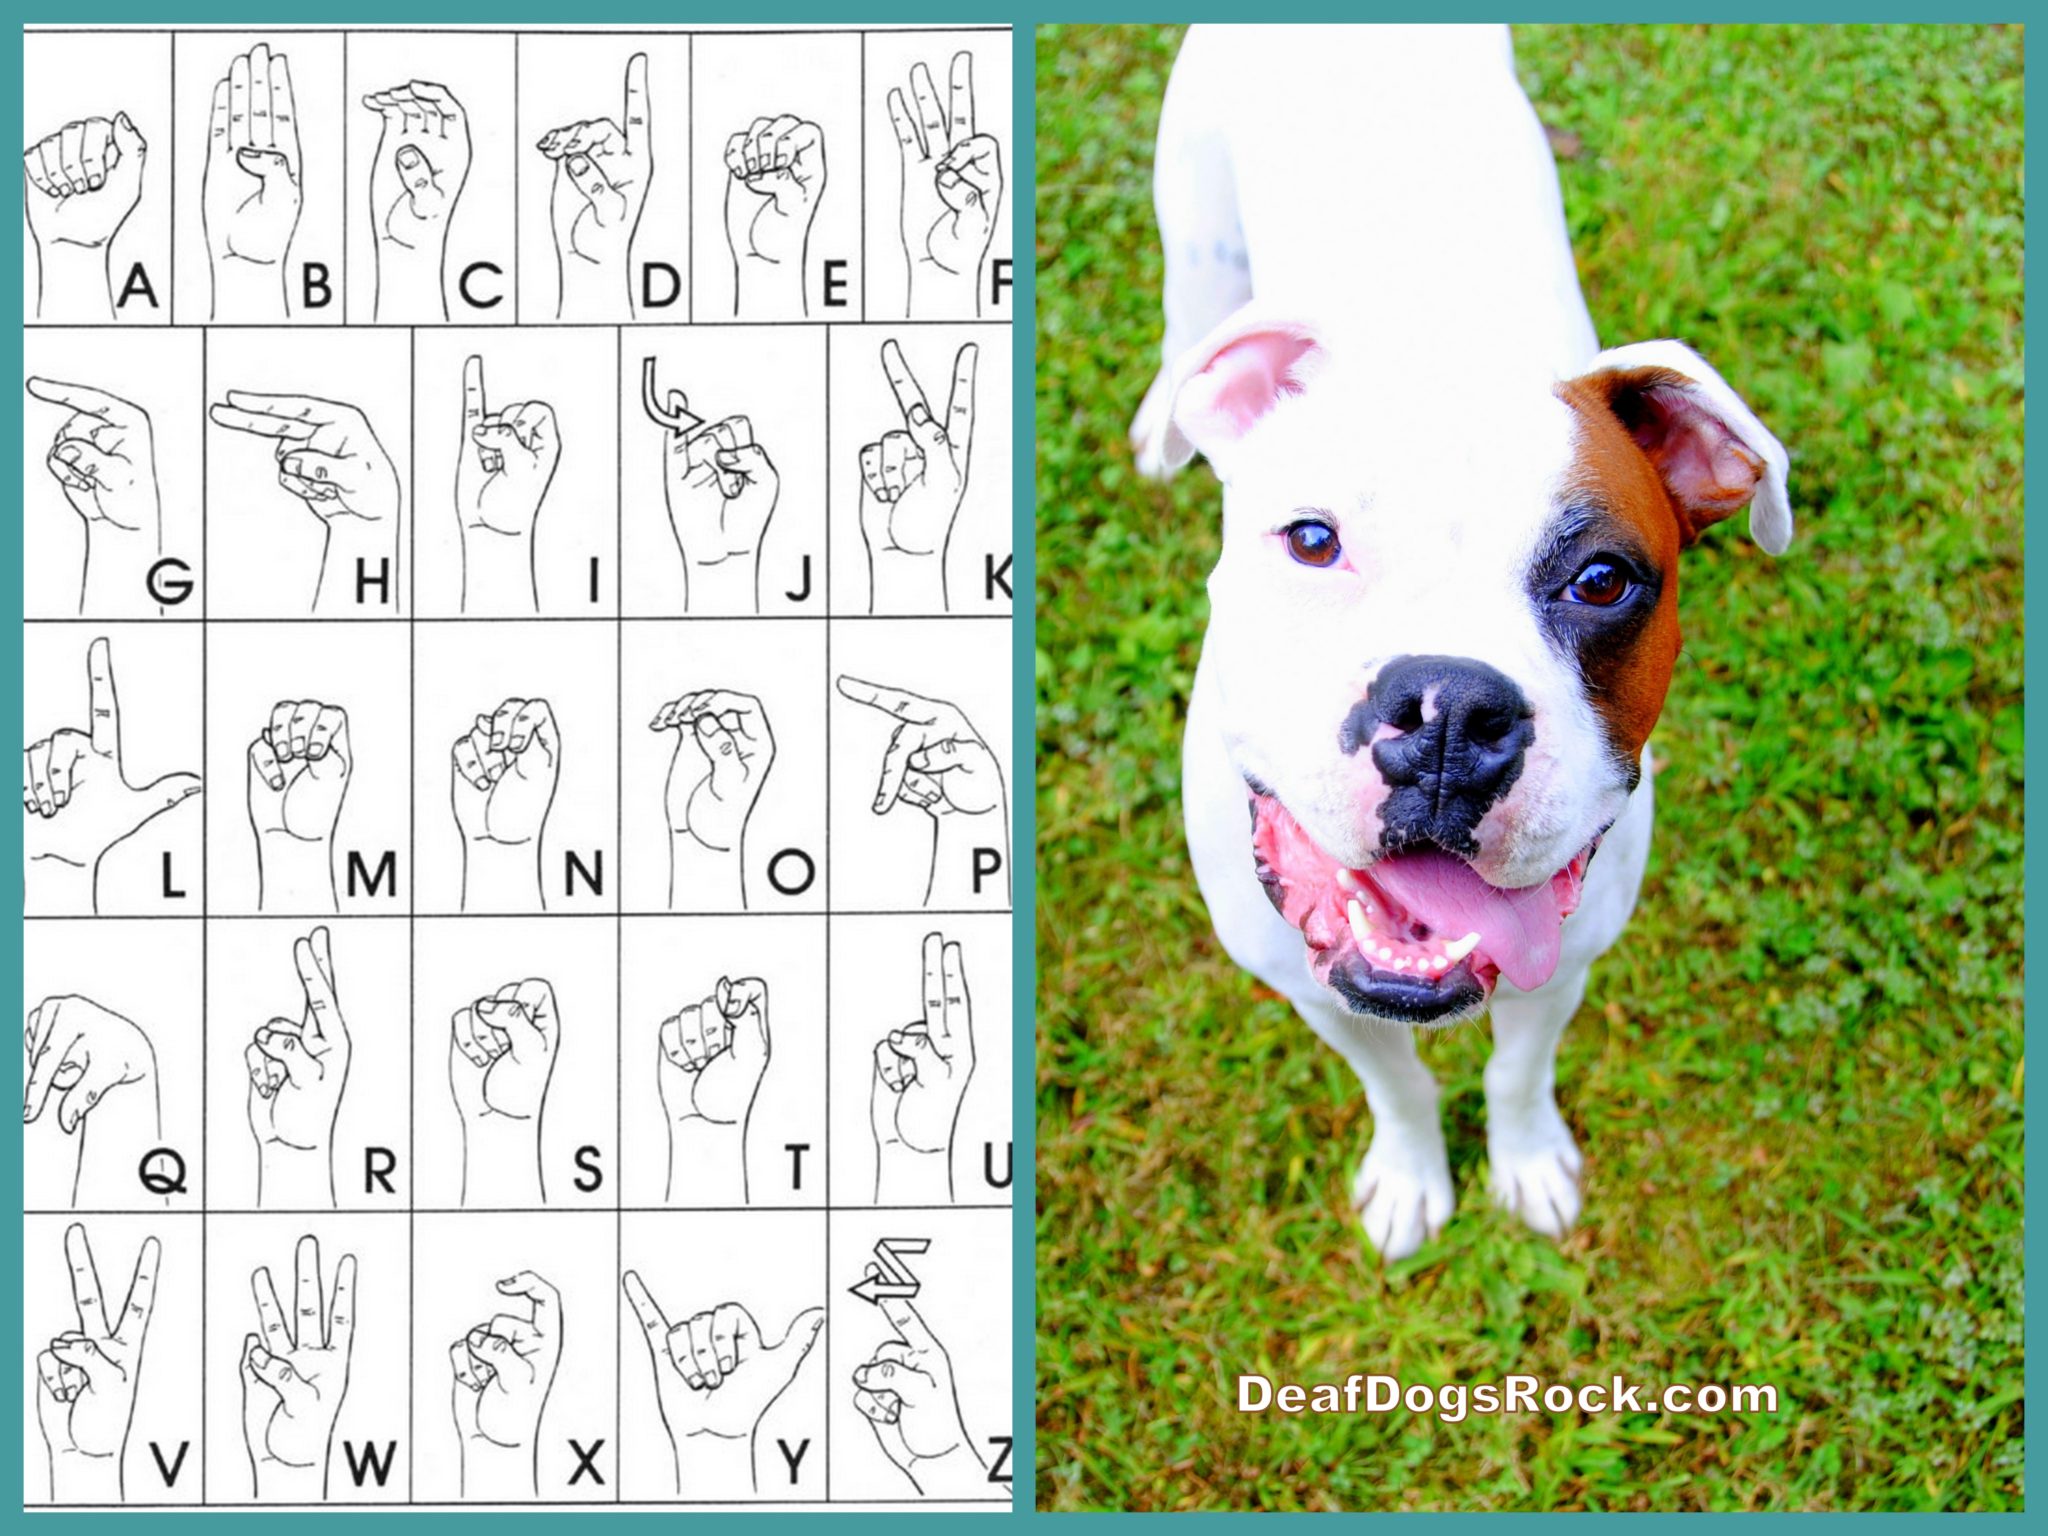 the deaf puppy or dog needs to be looking at